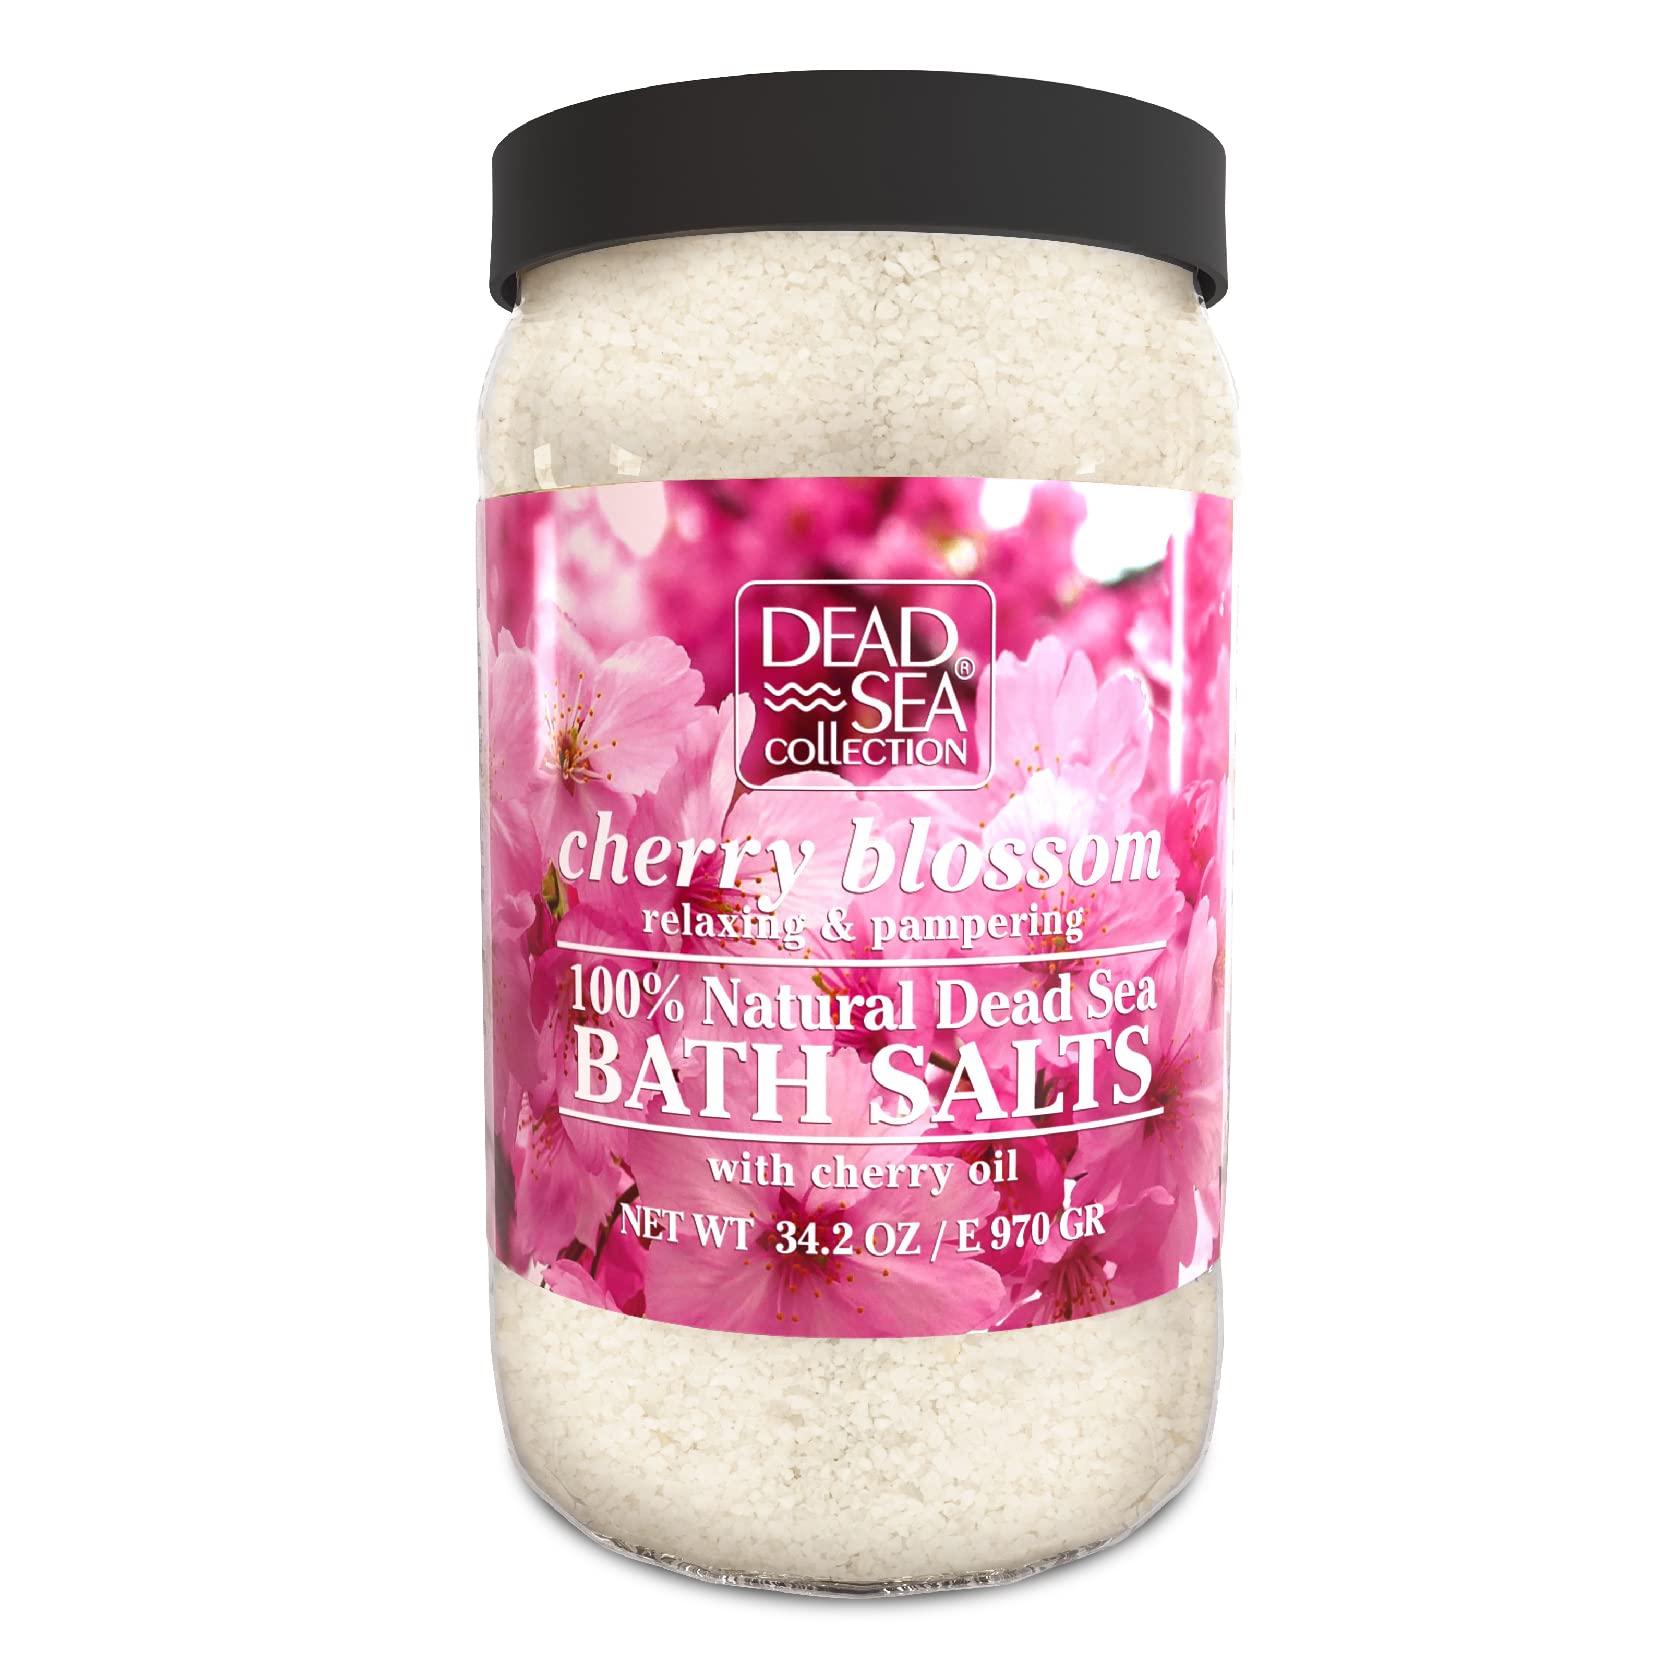 Dead Sea Collection Bath Salts Enriched 2pc - Cherry Blossom - Coconut -Natural Salt for Bath -2 x Large 34.2 OZ. - Nourishing Essential Body Care for Soothing and Relaxing Your Skin and Muscle